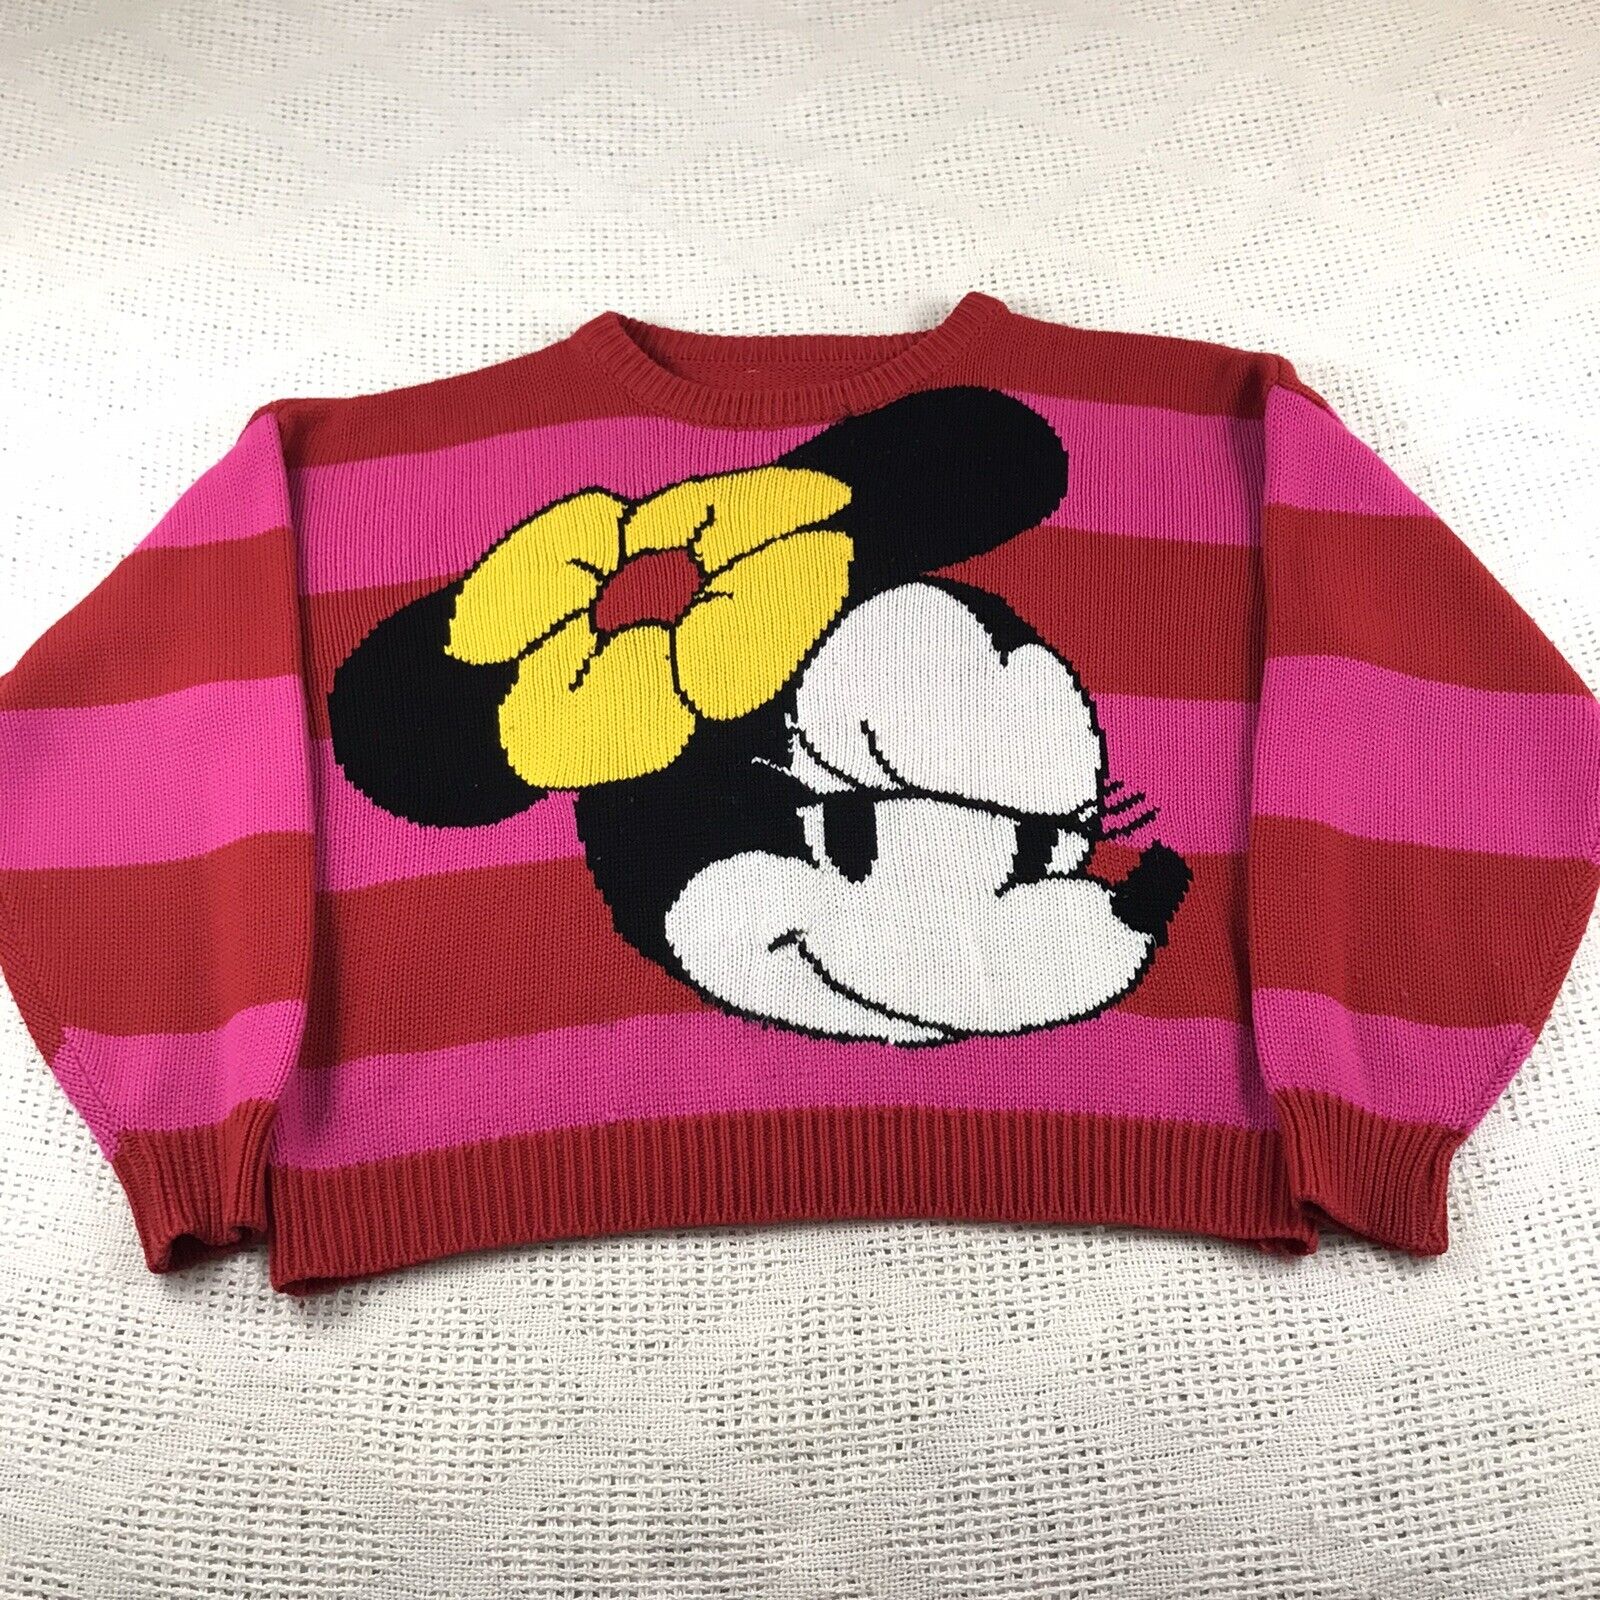 Vintage Intarsia Acrylic Pink & Red Striped Knit Minnie Mouse Sweater Small/Med